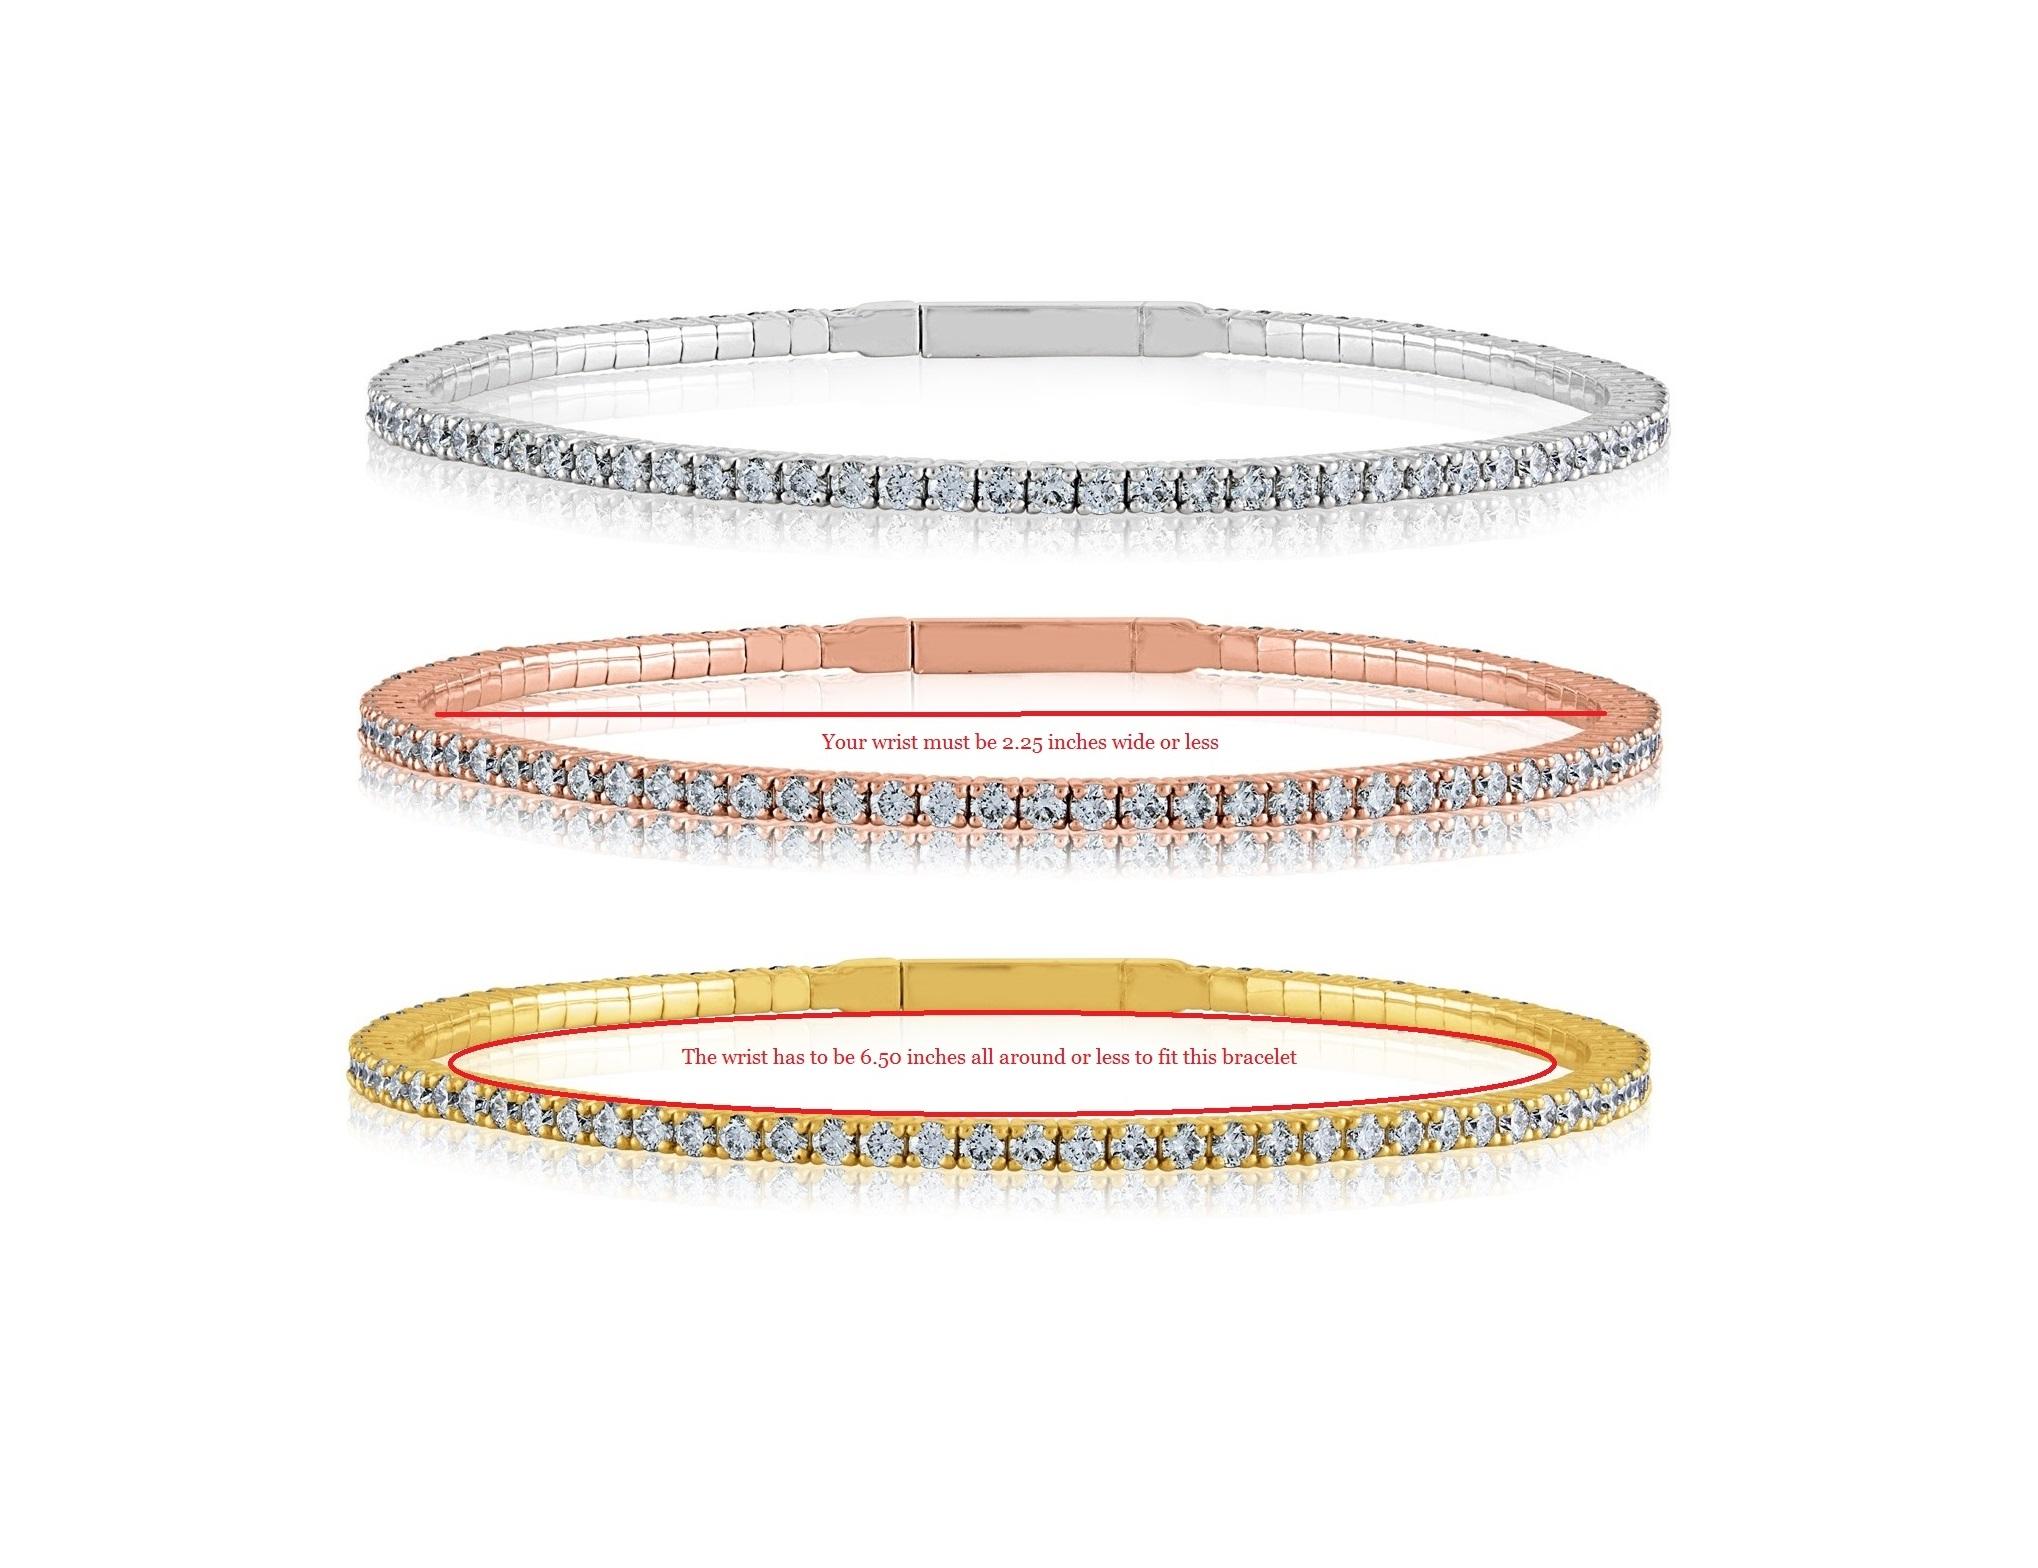 All around Diamond Gold Bangle Tension Bracelet
The bracelet is flexible and bends.
The bracelet is 14K Rose Gold or Yellow Gold or White Gold
There is 2.30 Carats in Diamonds F/G VS/SI
Fits up to 6.50 inch wrist.
The bracelet weighs 8.3